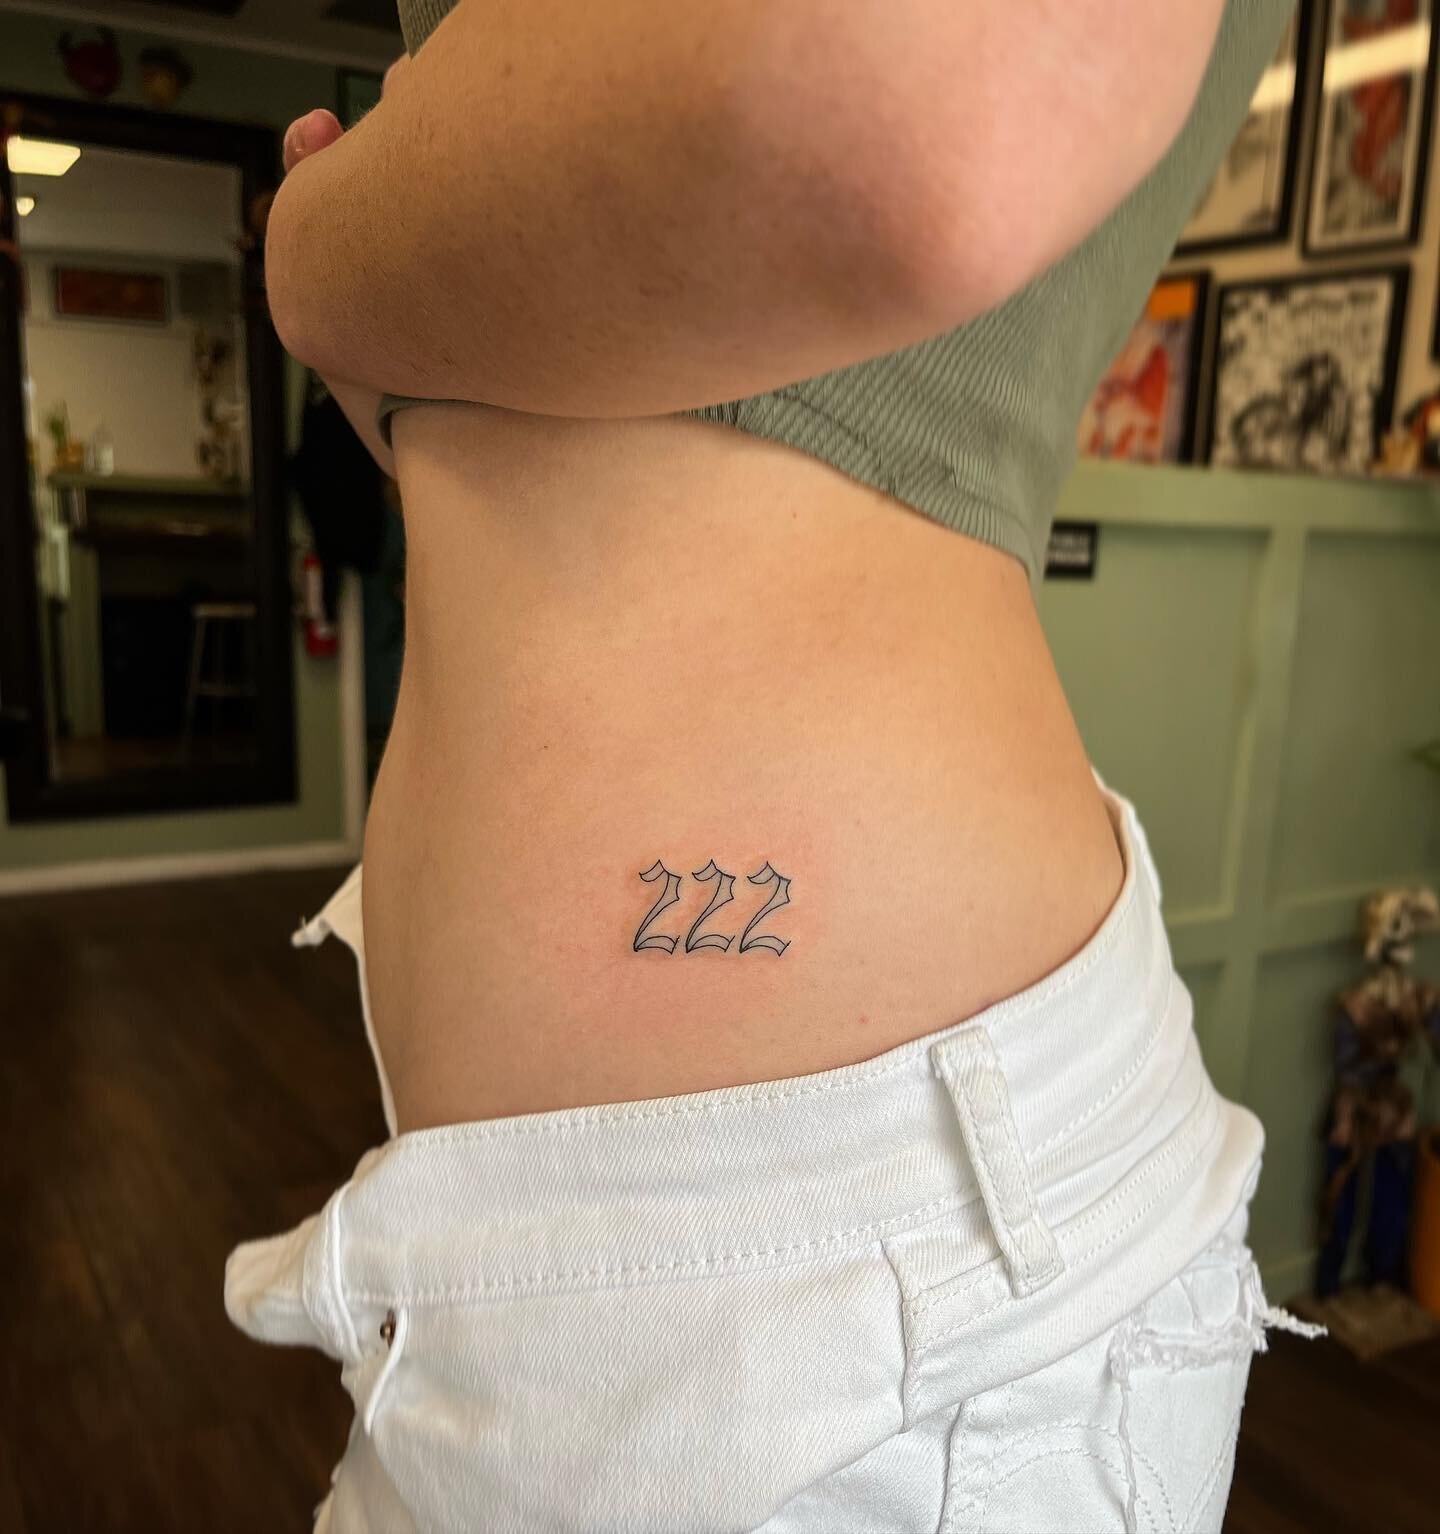 Happy 2/22/22!! 🥳 here&rsquo;s a thin and crispy one @kd1904 did on @katelynnalex Katelynn you were a champ! Thanks a buch for the support! Clementinetattoo.com #clementinetattoo #clementine #sandiegotattooartist #sandiegotattooshop #sandiegotattoo 